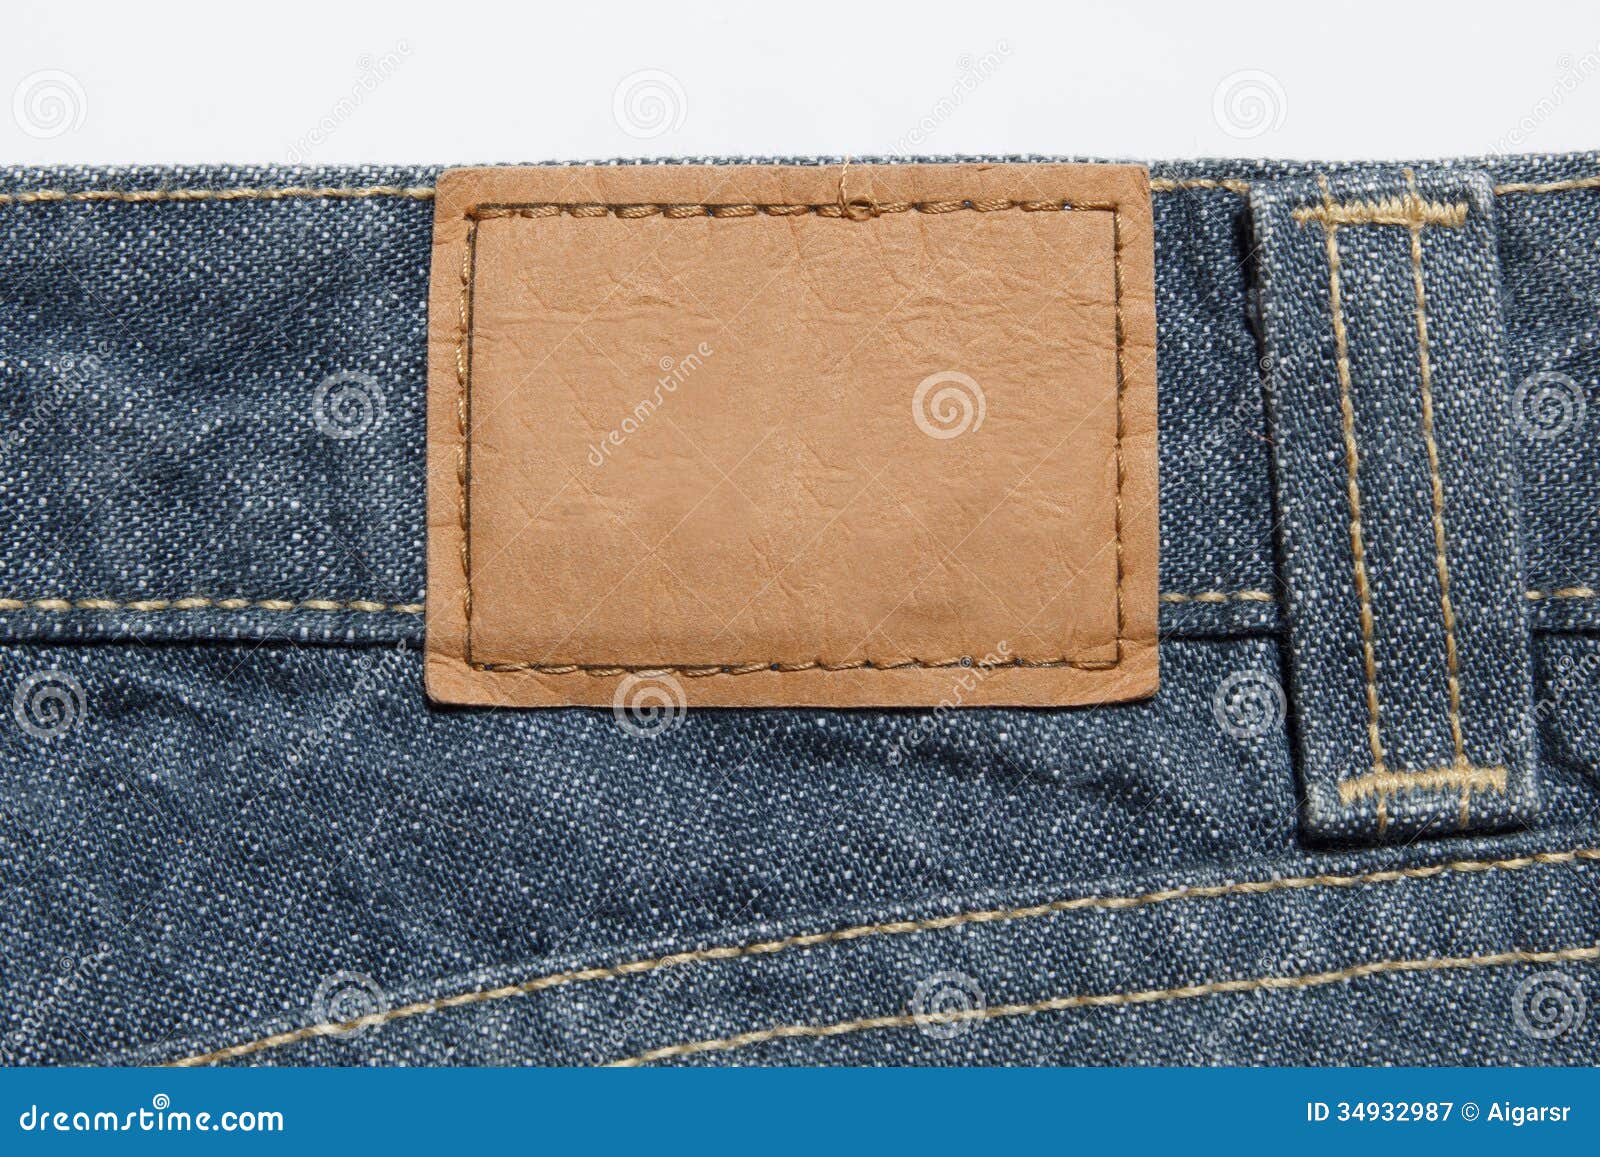 Leather label on jeans stock image. Image of texture - 34932987